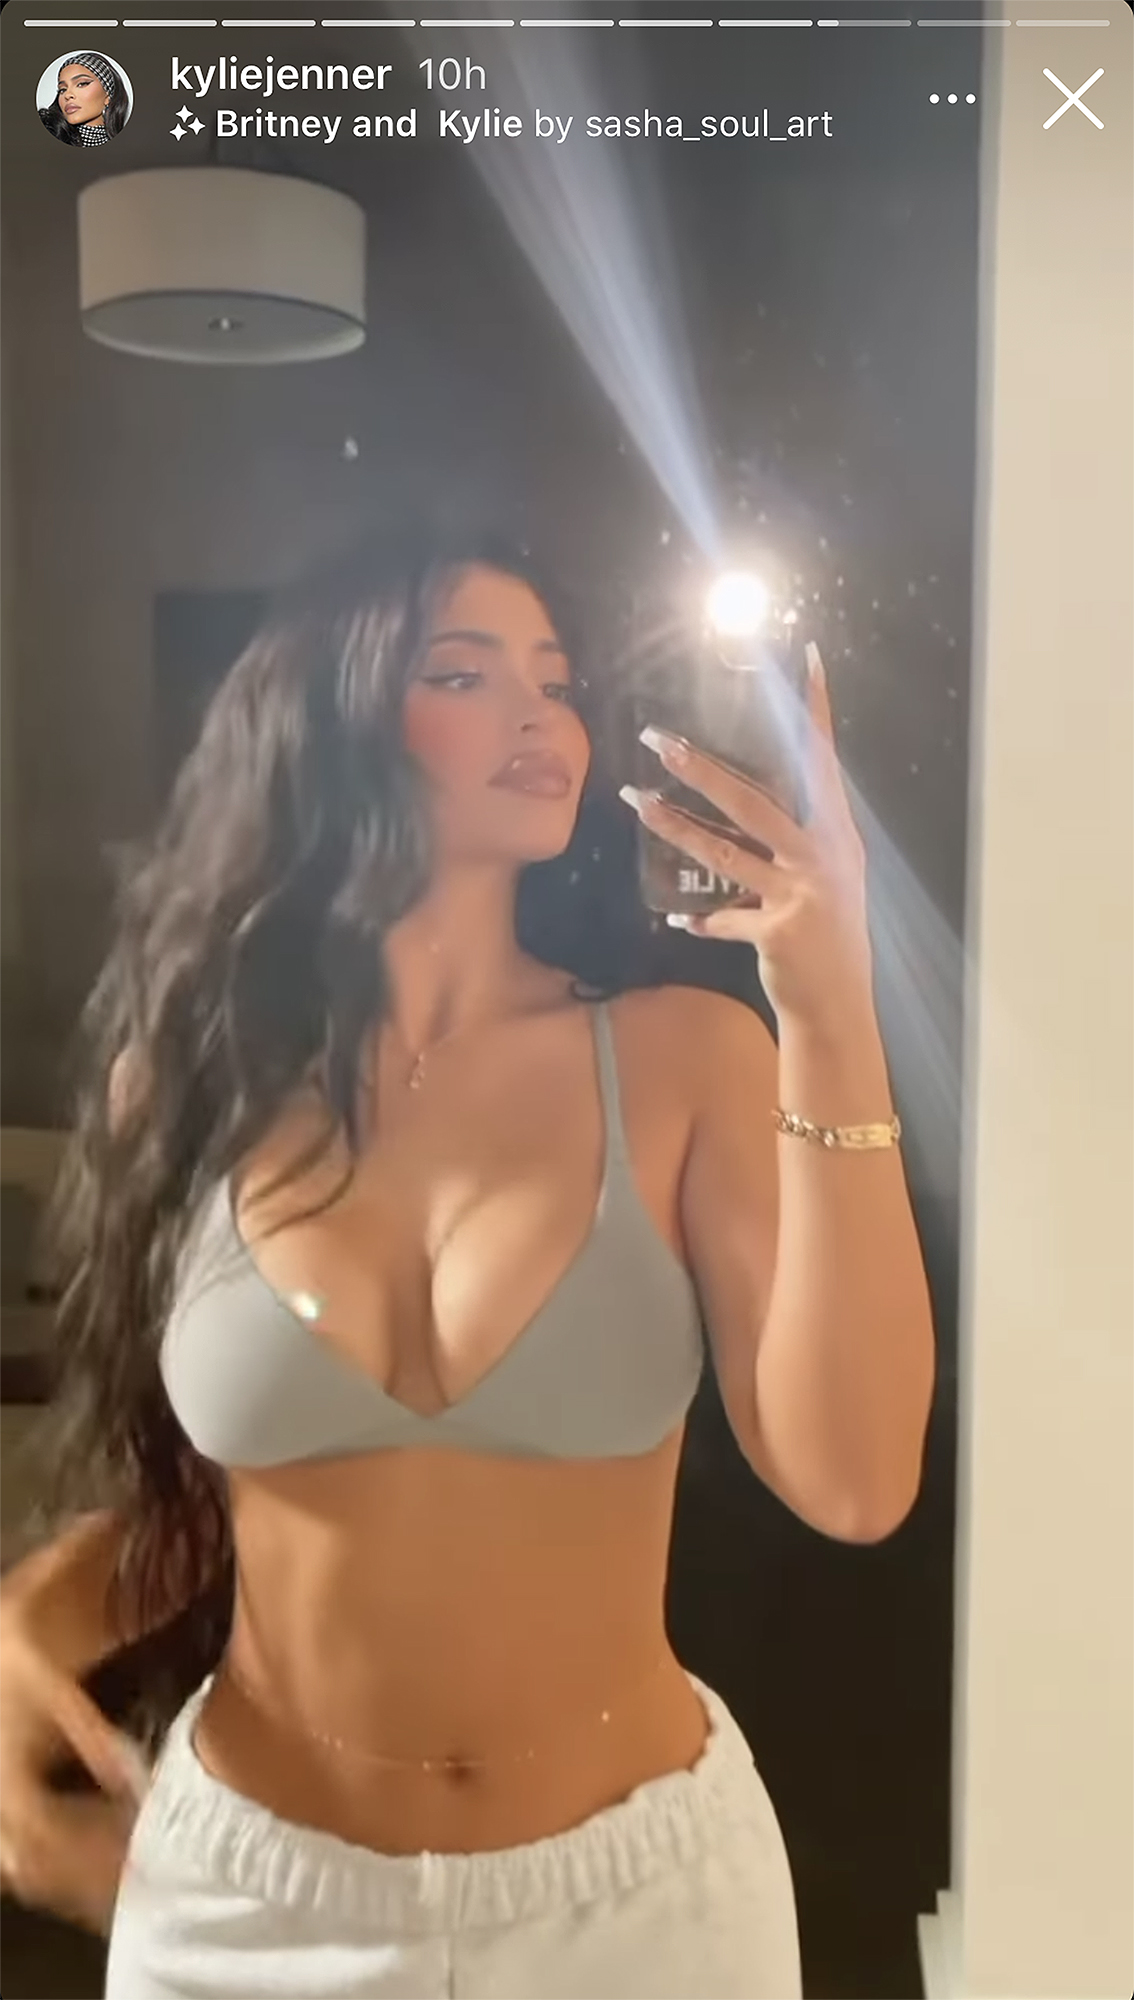 Kylie Jenner Wears Underwear to Promote Holiday Collection